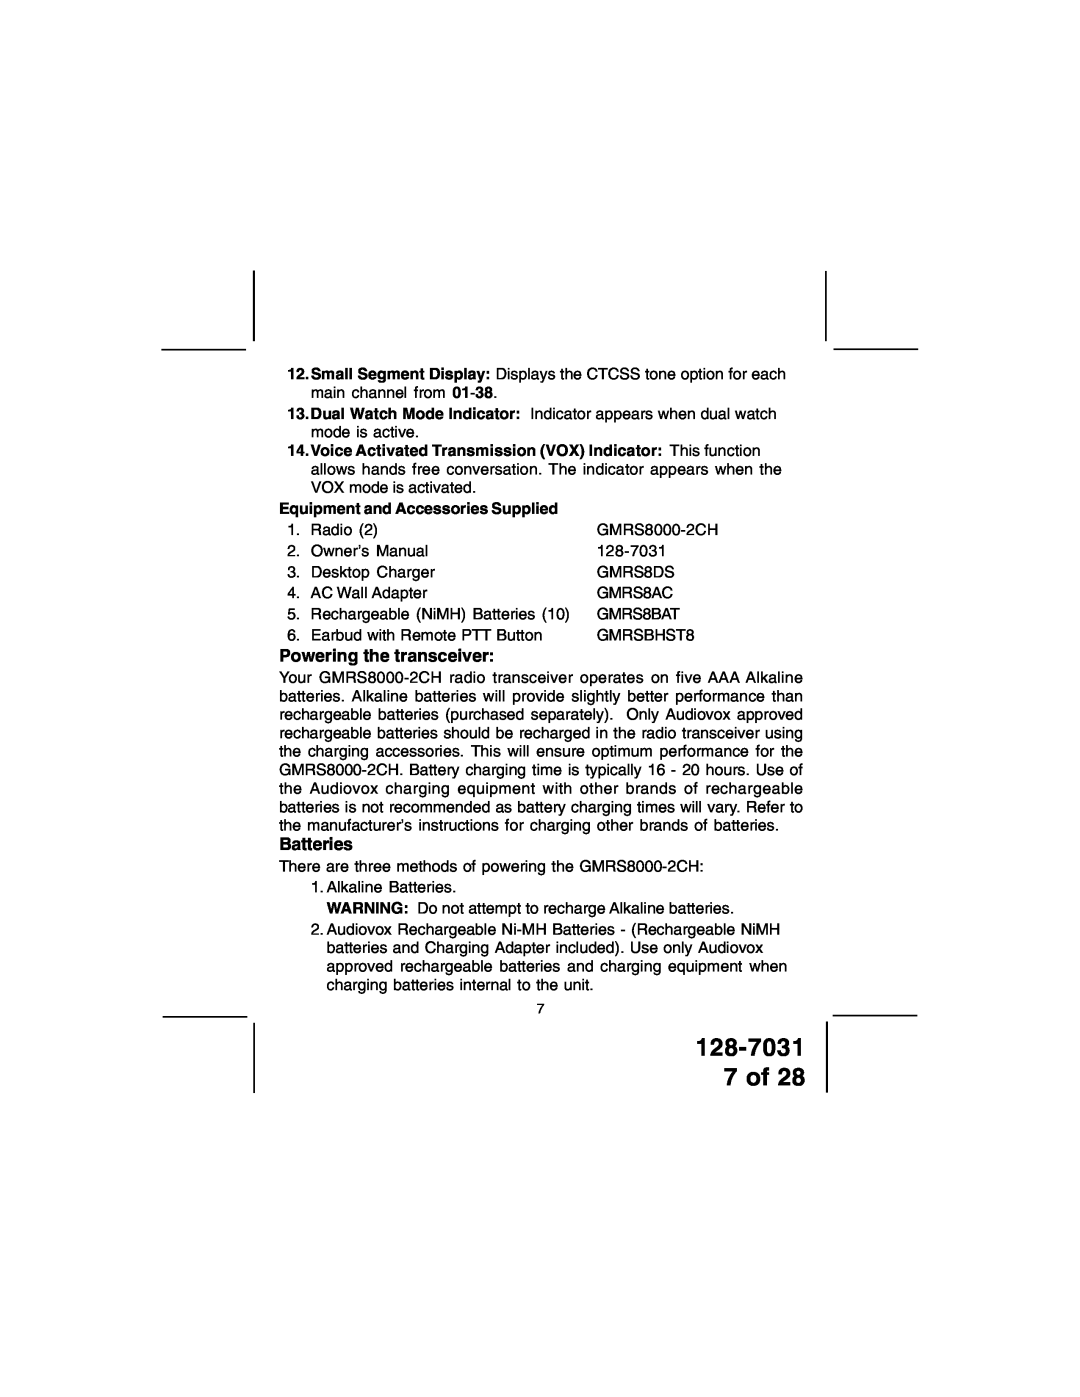 Audiovox owner manual 128-7031 7 of, Powering the transceiver, Batteries, Equipment and Accessories Supplied 